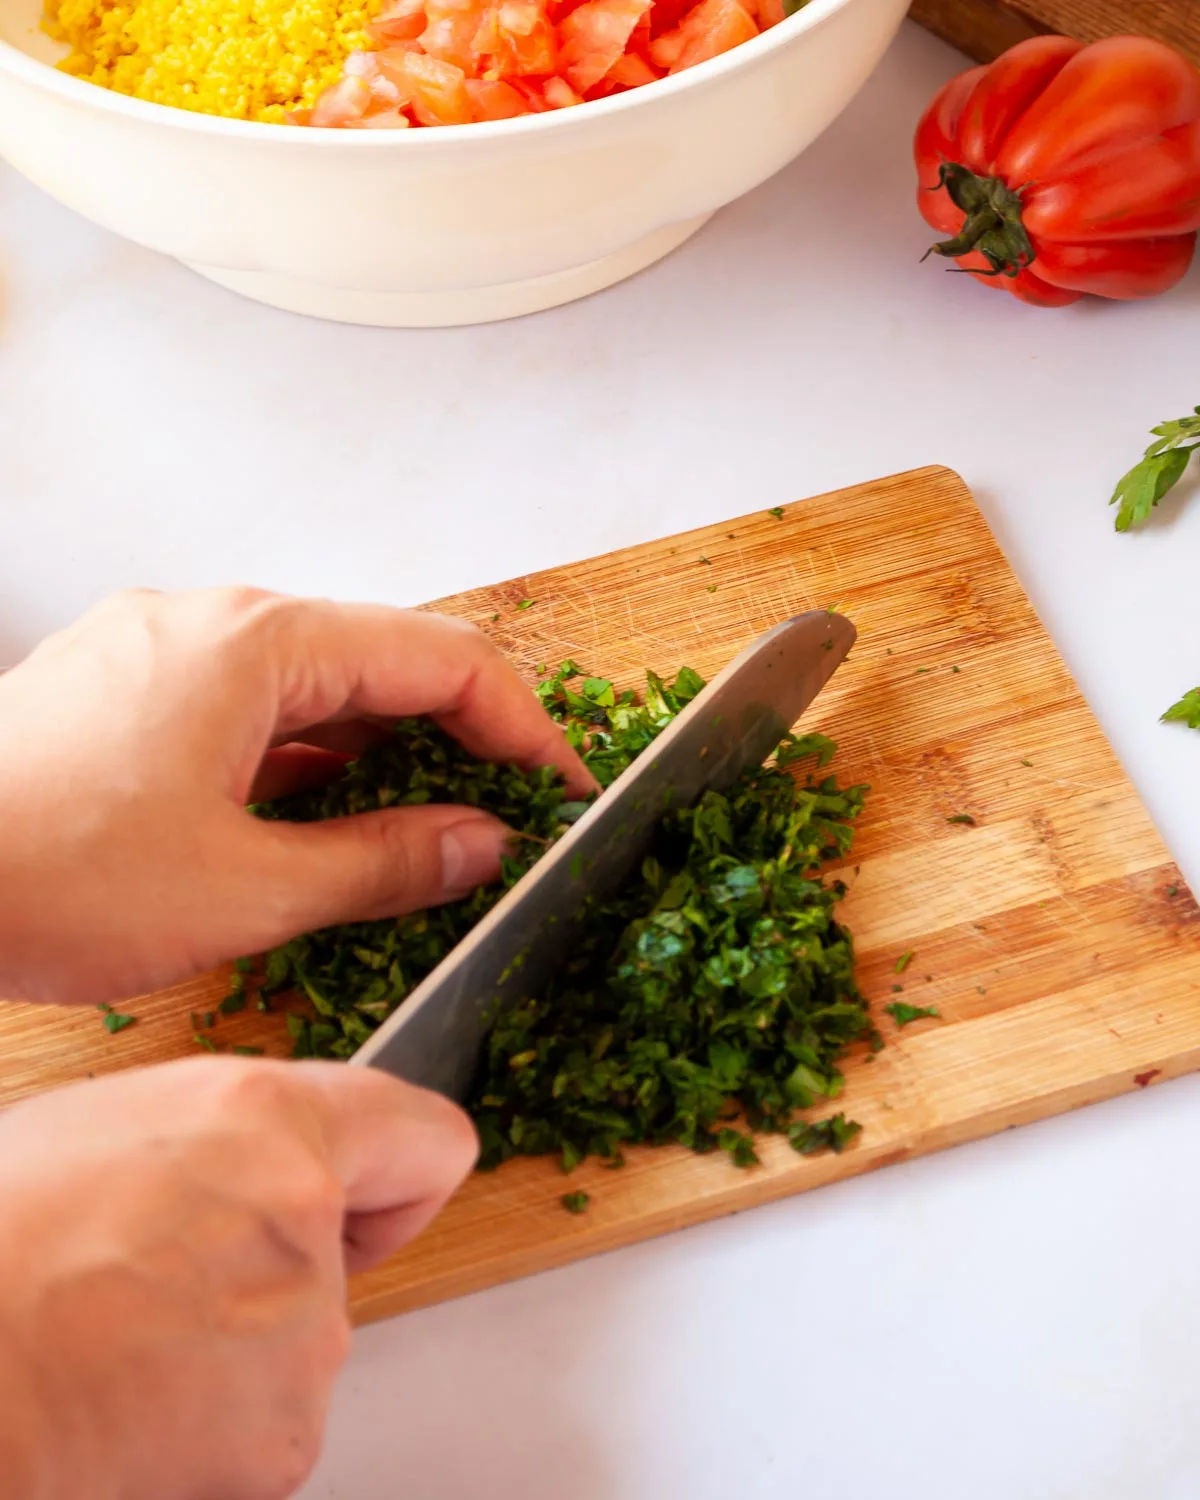 Chopping fresh parsley and mint.